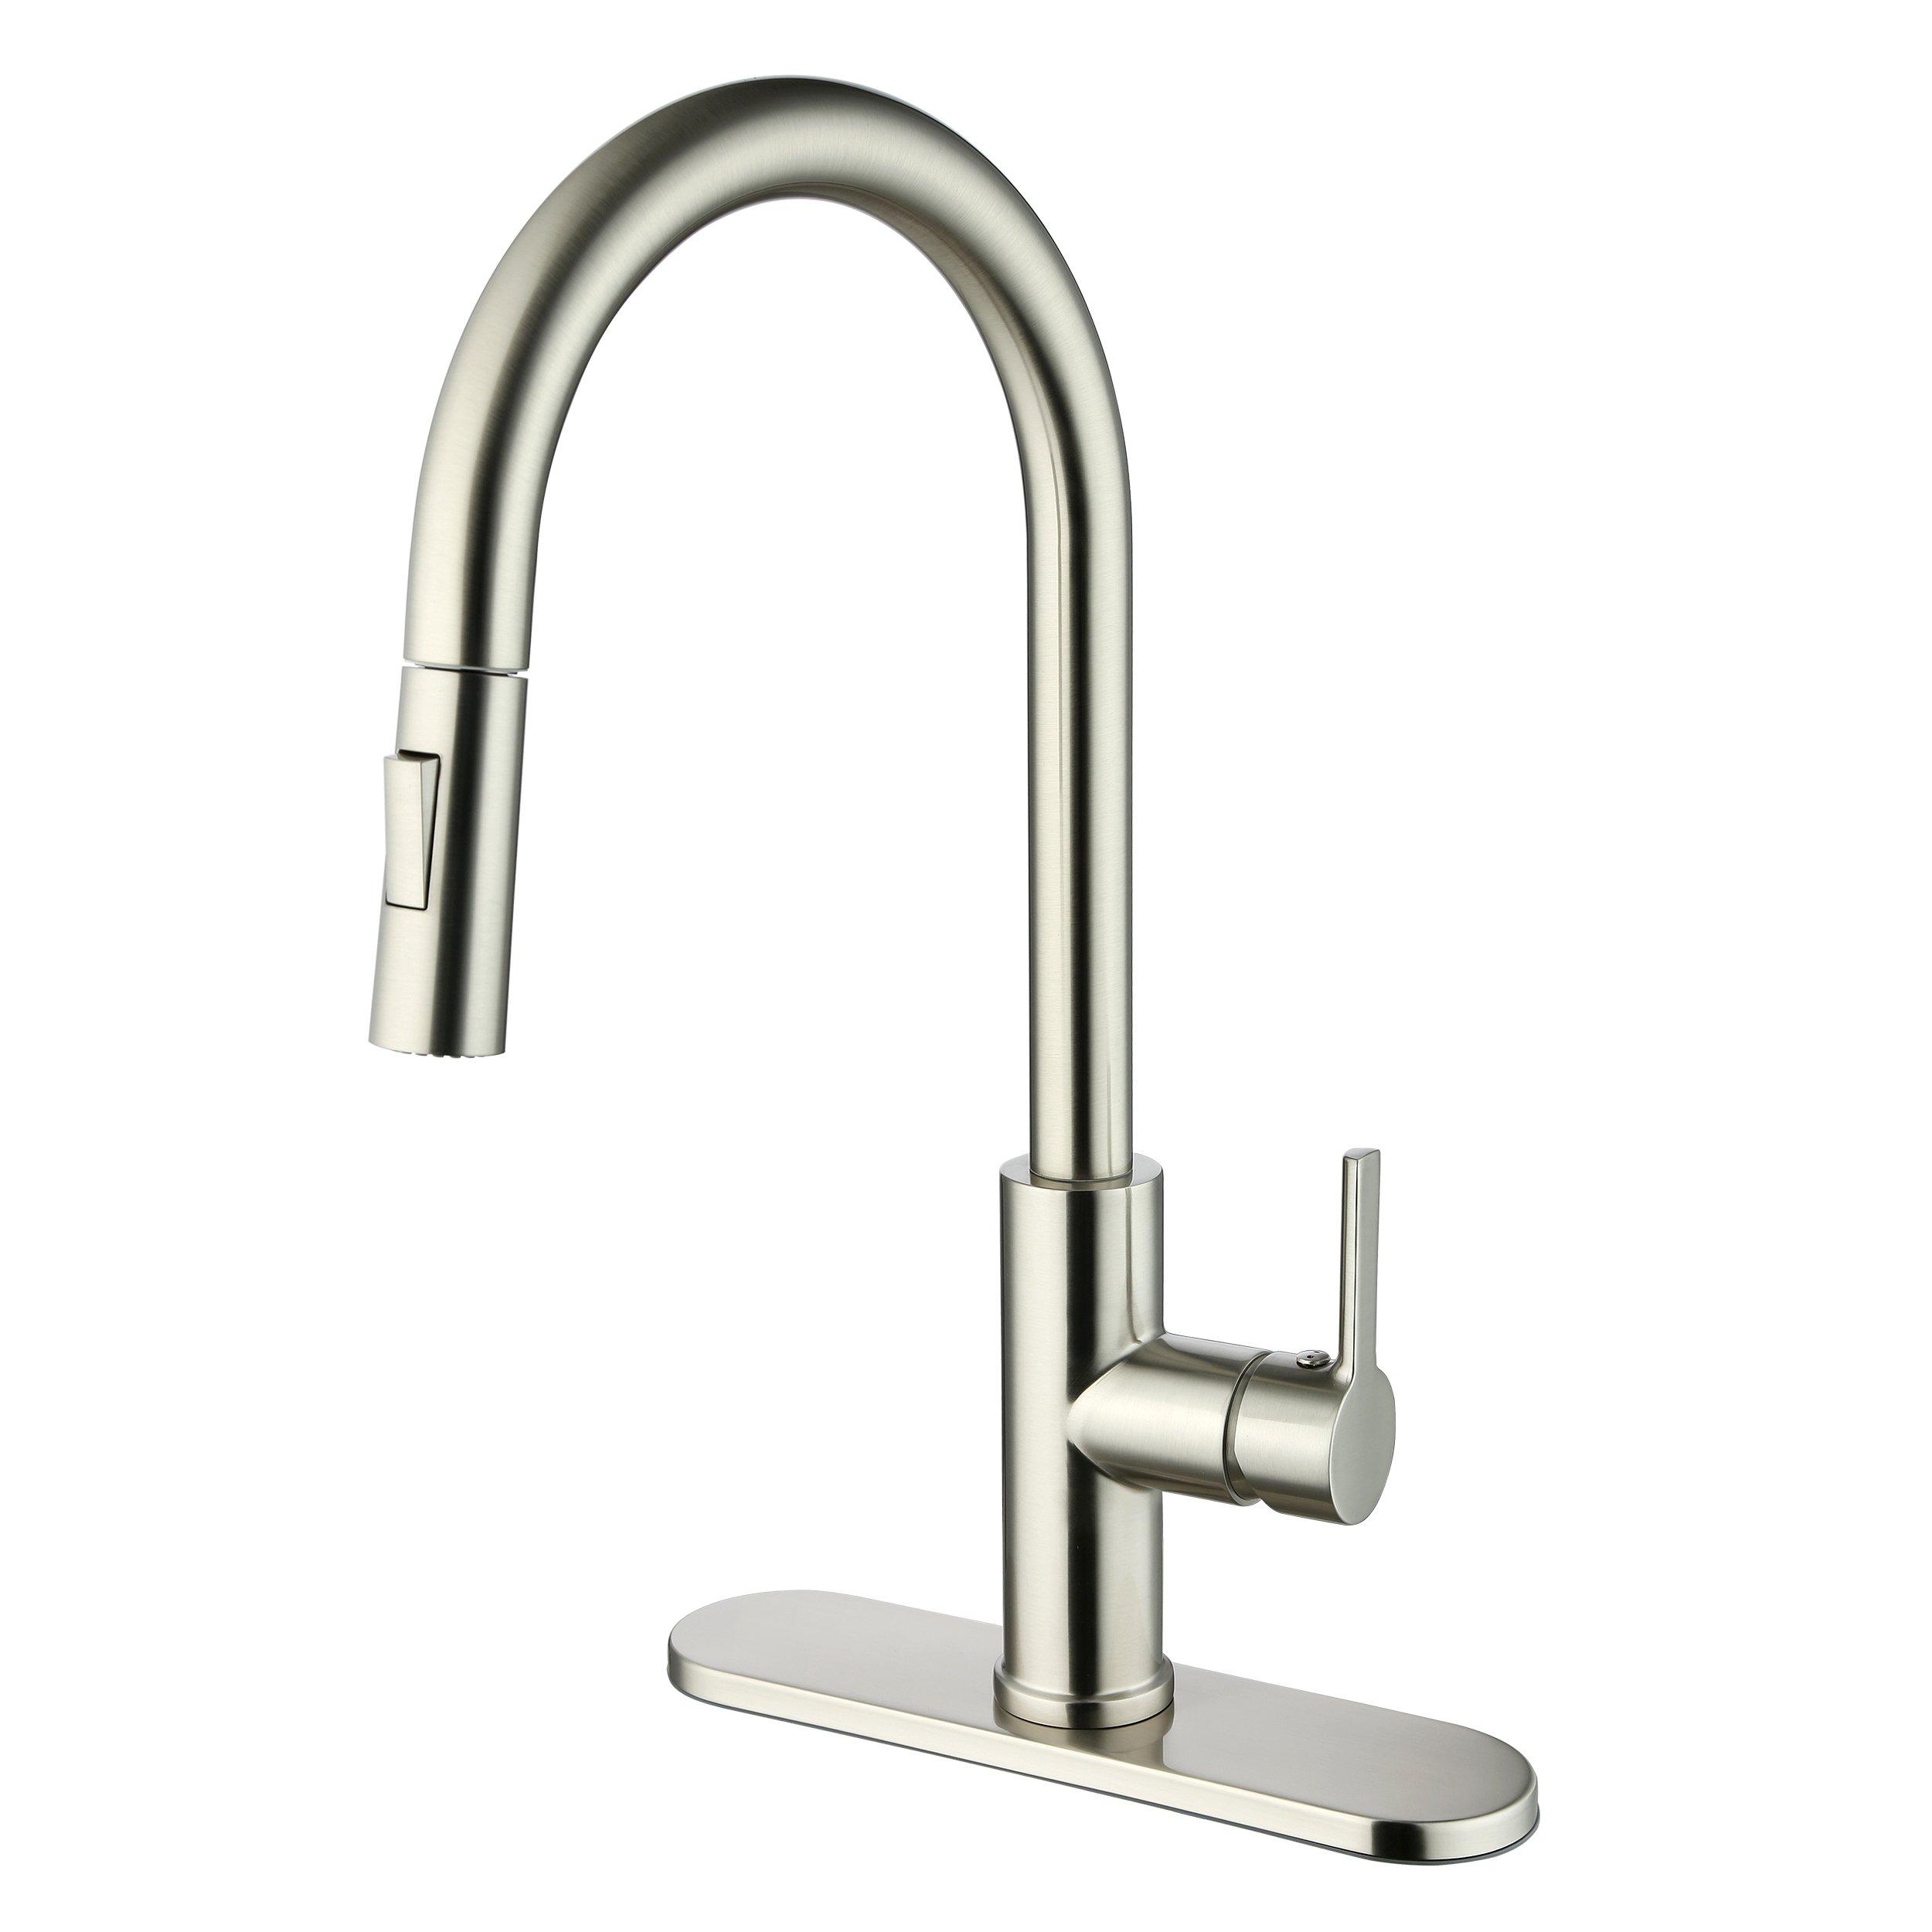 Rhiver Pull Down Brushed Nickel Kitchen Faucet